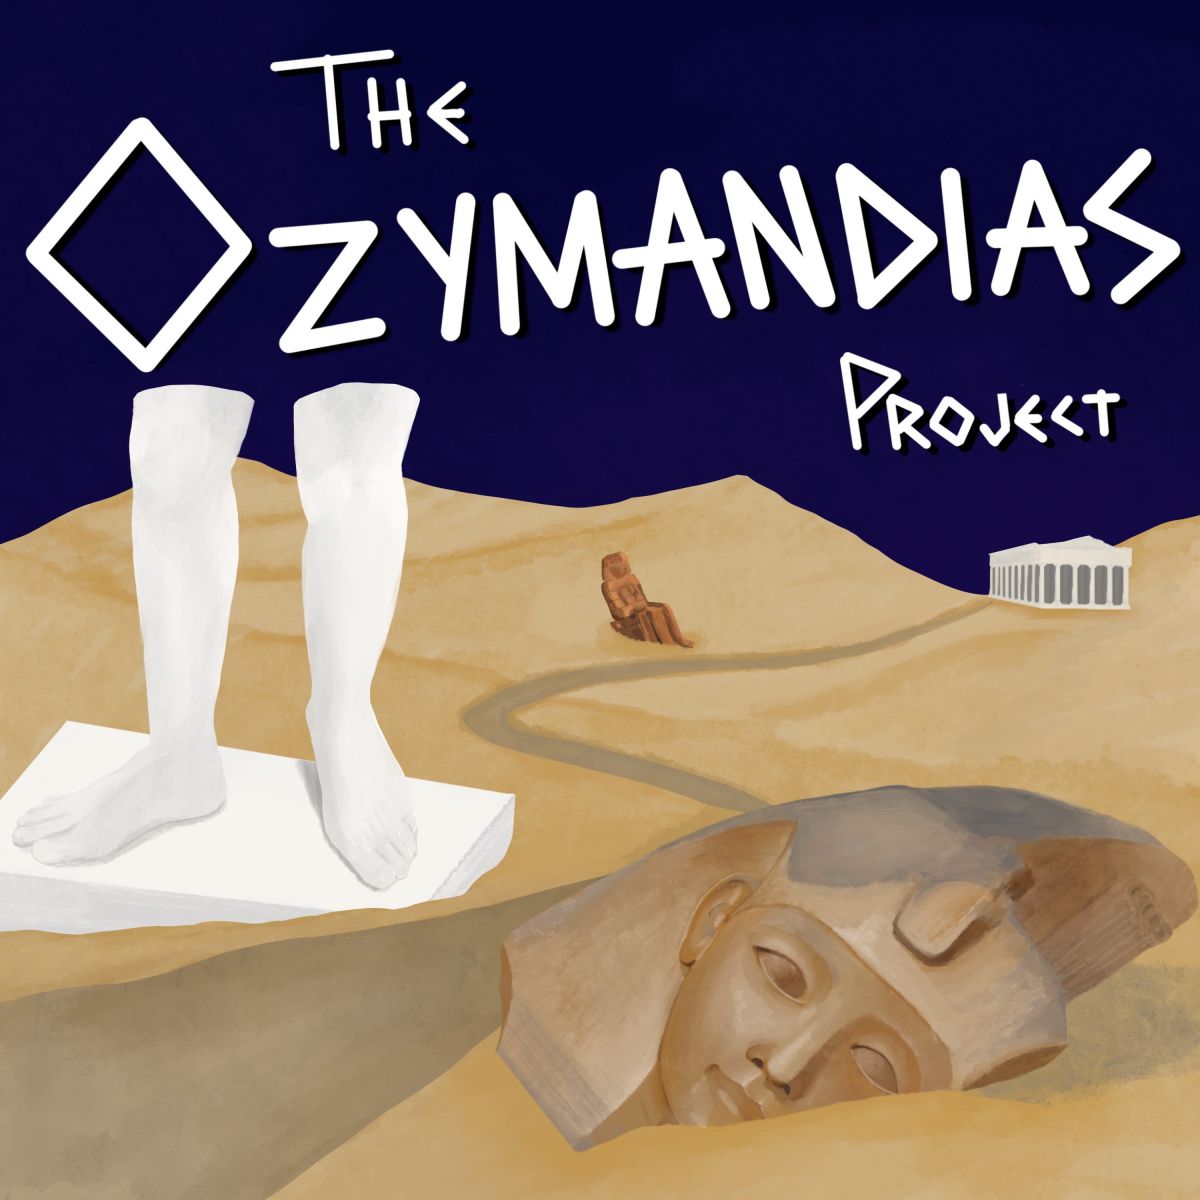 The visual artwork for the Ozymandias Project podcast showcasing the podcast’s interest in Ancient Greece and Egypt.